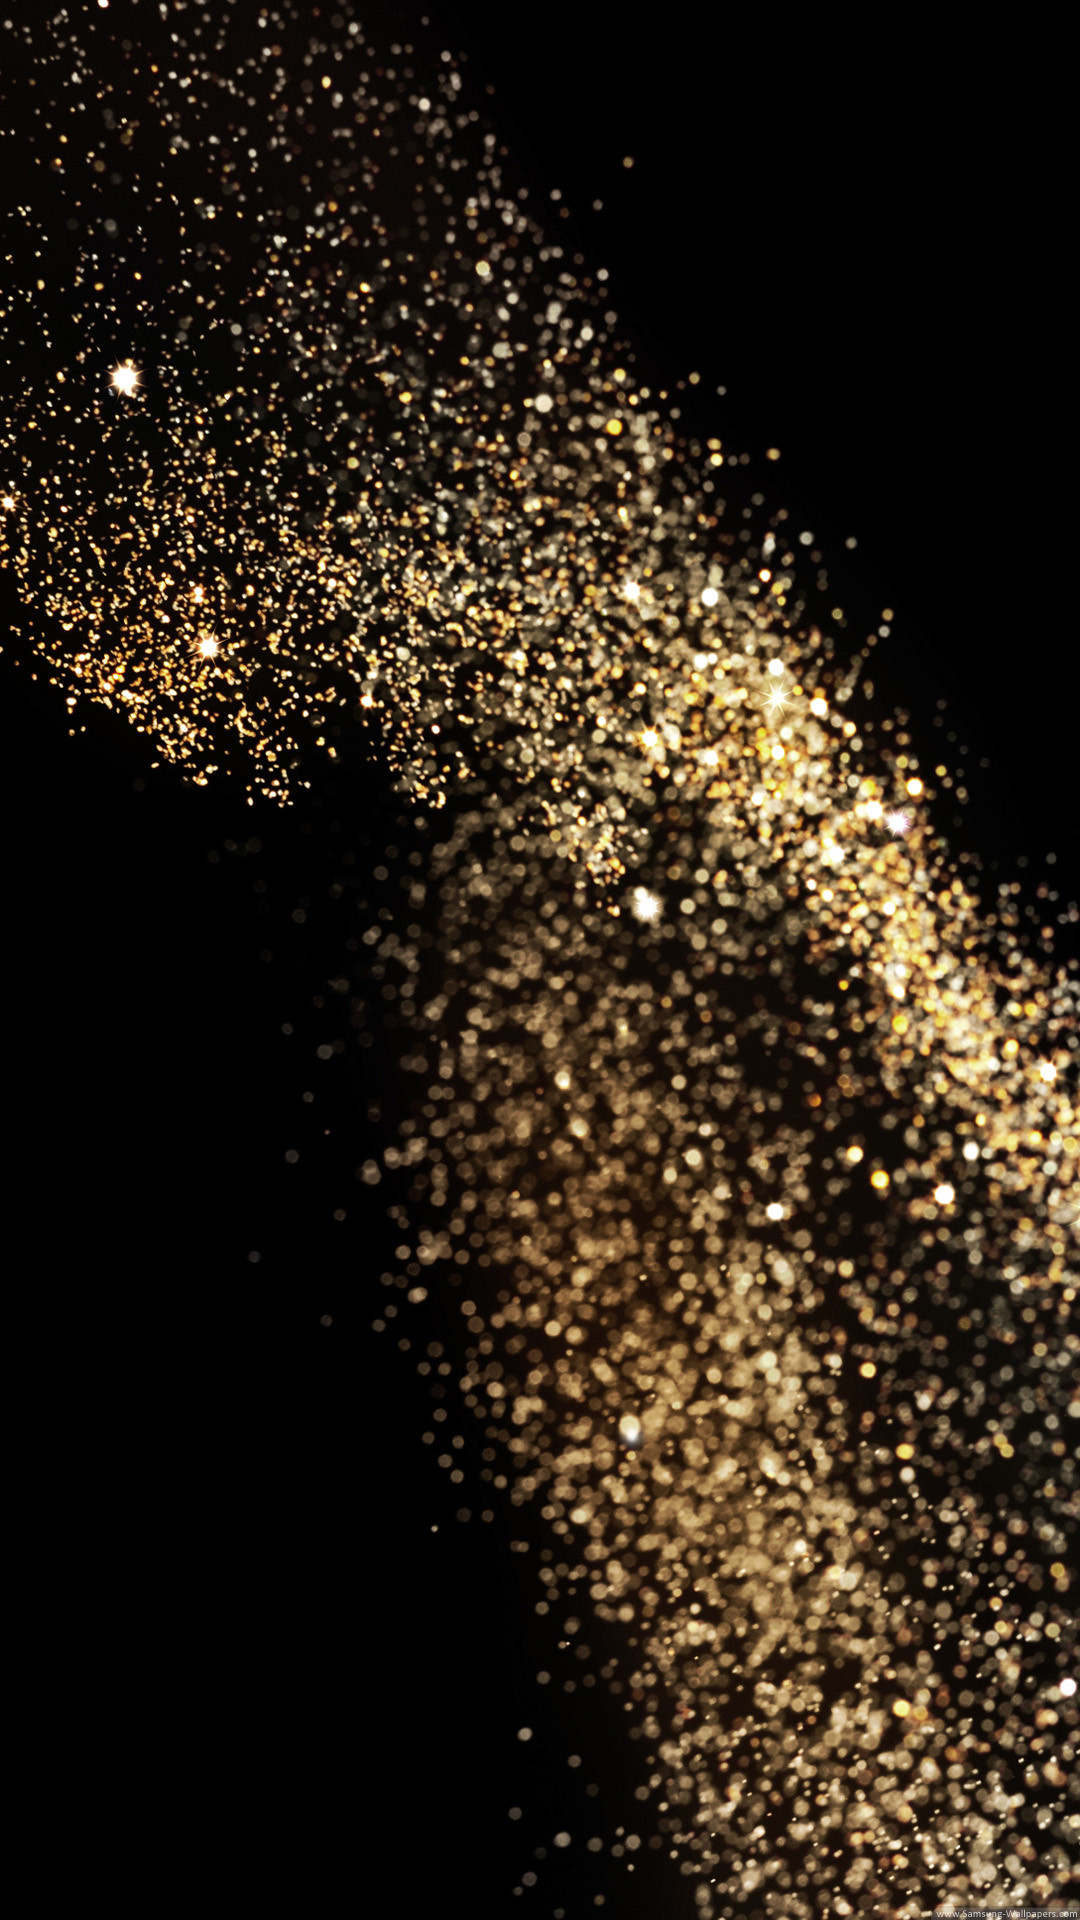 Phone Backgrounds, Iphone Wallpaper, Gold Glitter, - Glitter Wallpaper Black And Gold - HD Wallpaper 